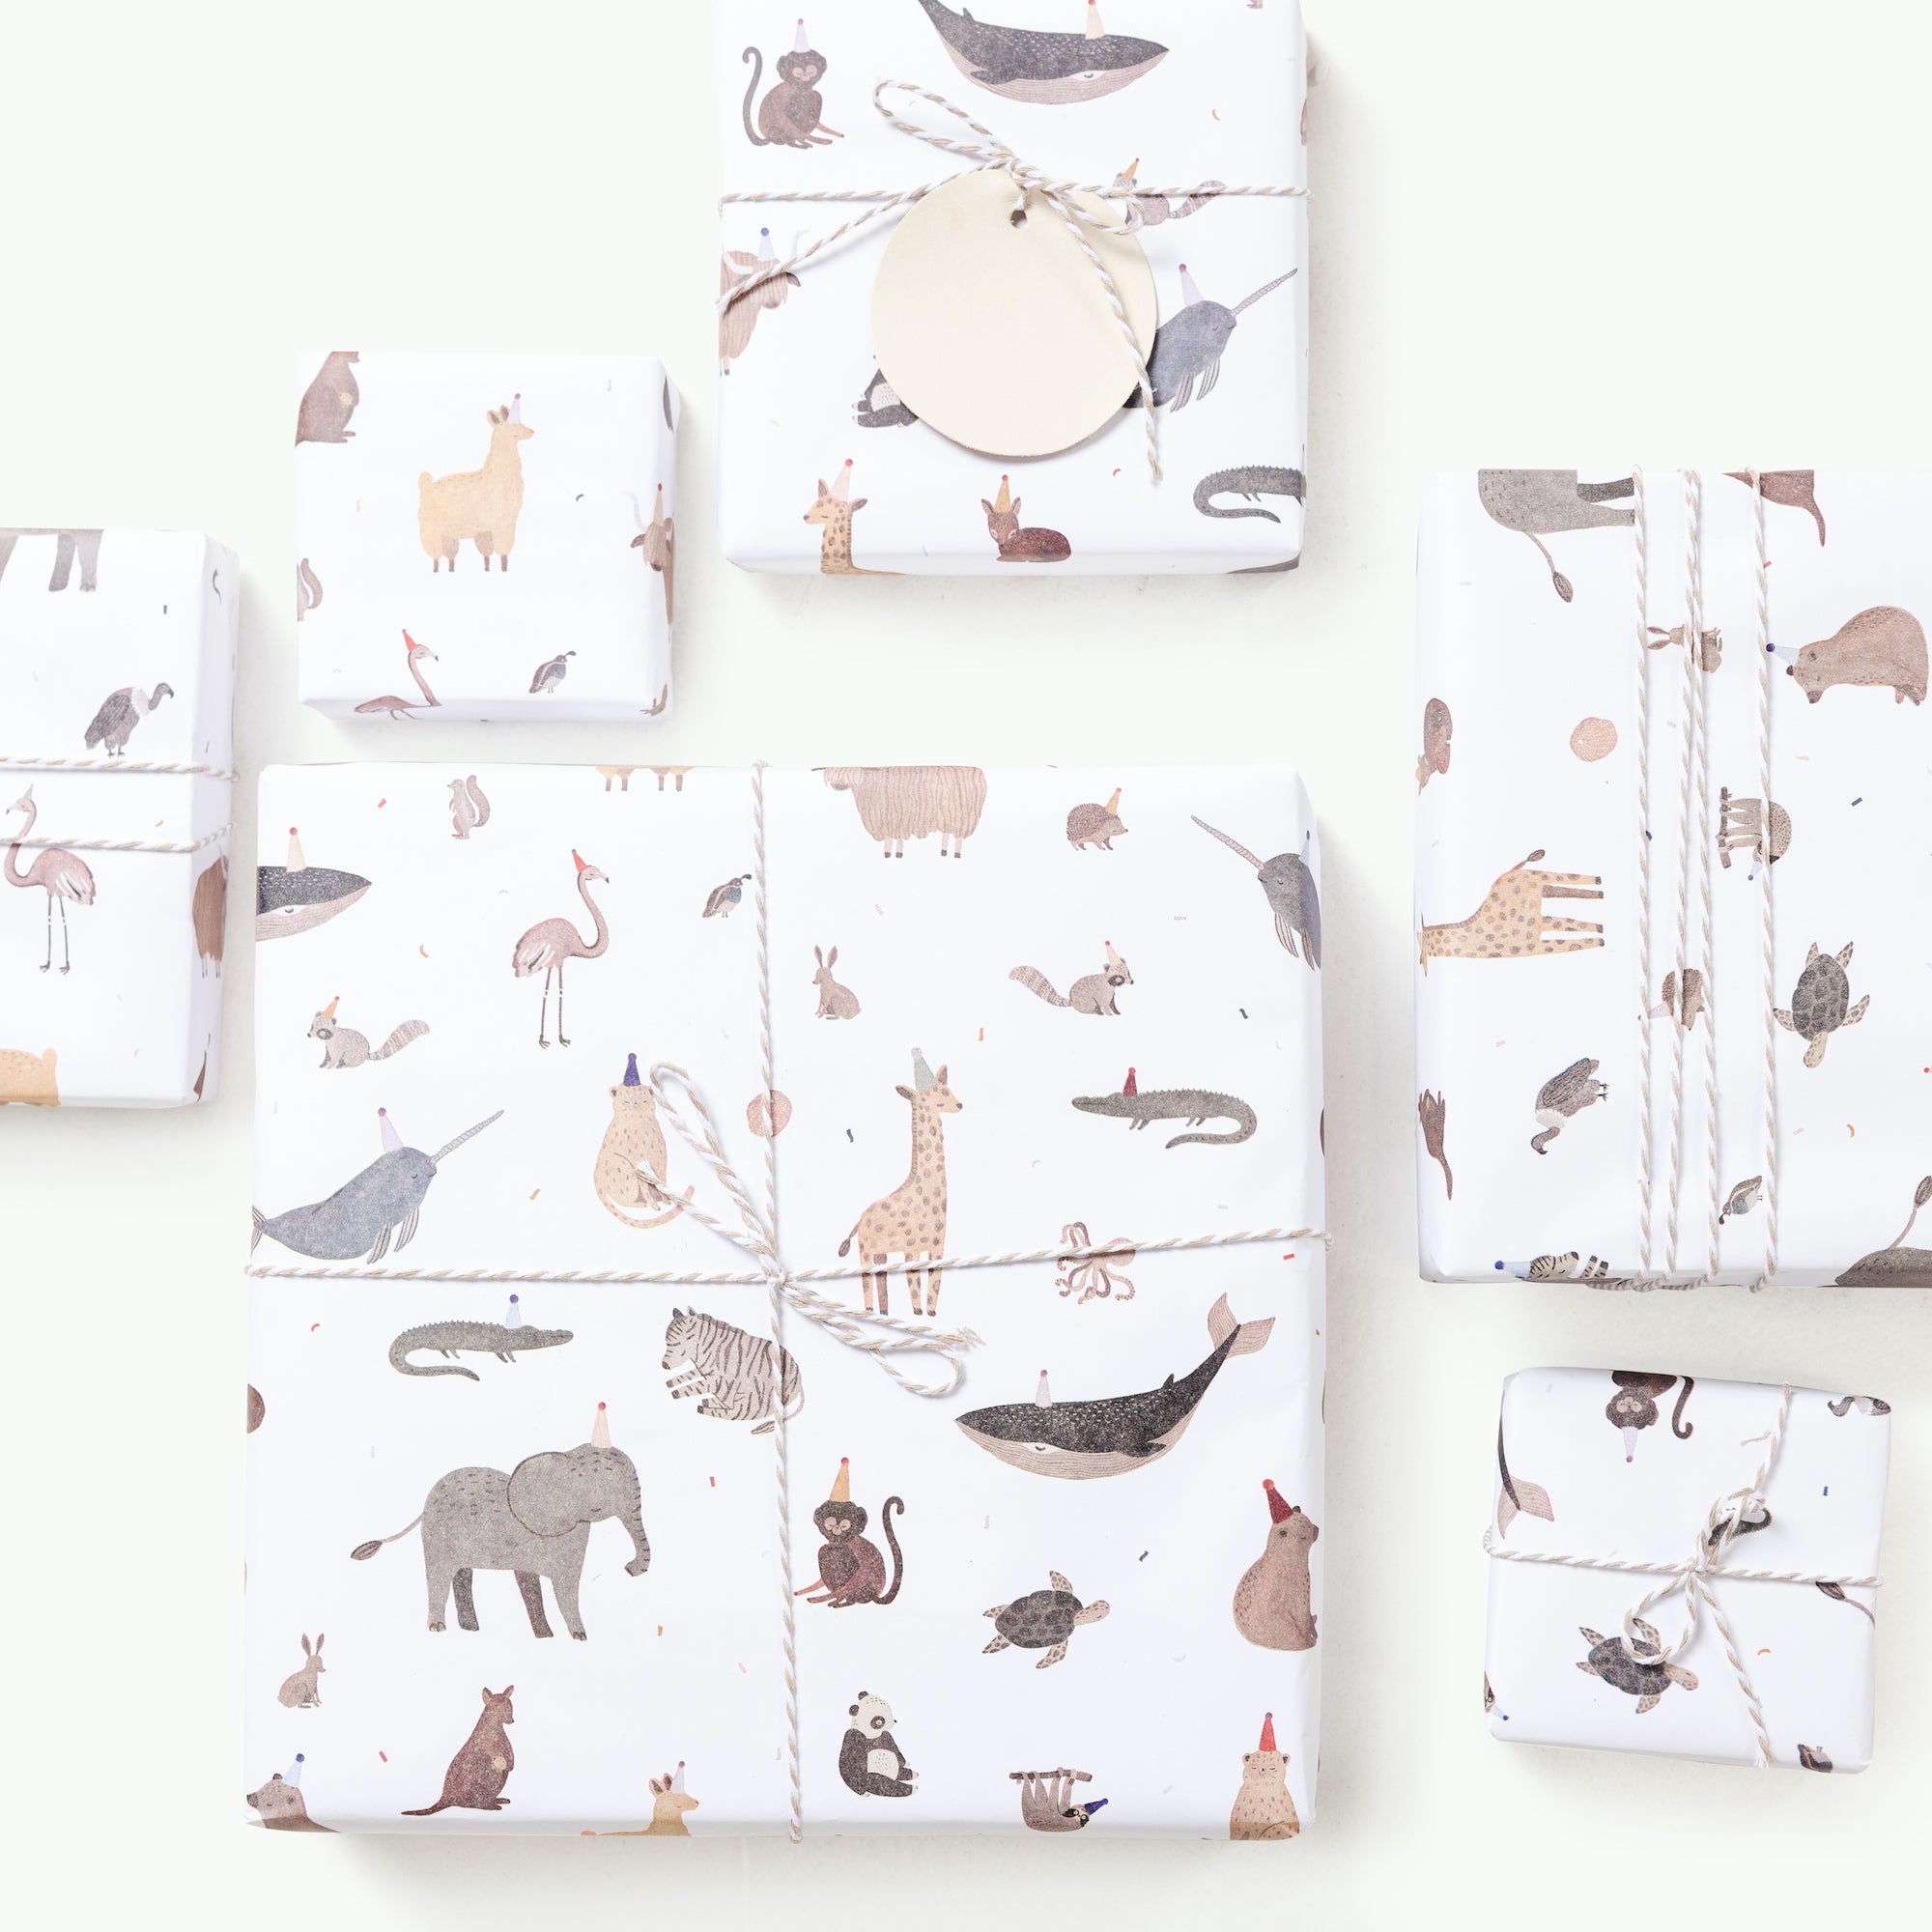 Menagerie (on sale)@gifts wrapped in menagerie gift wrap